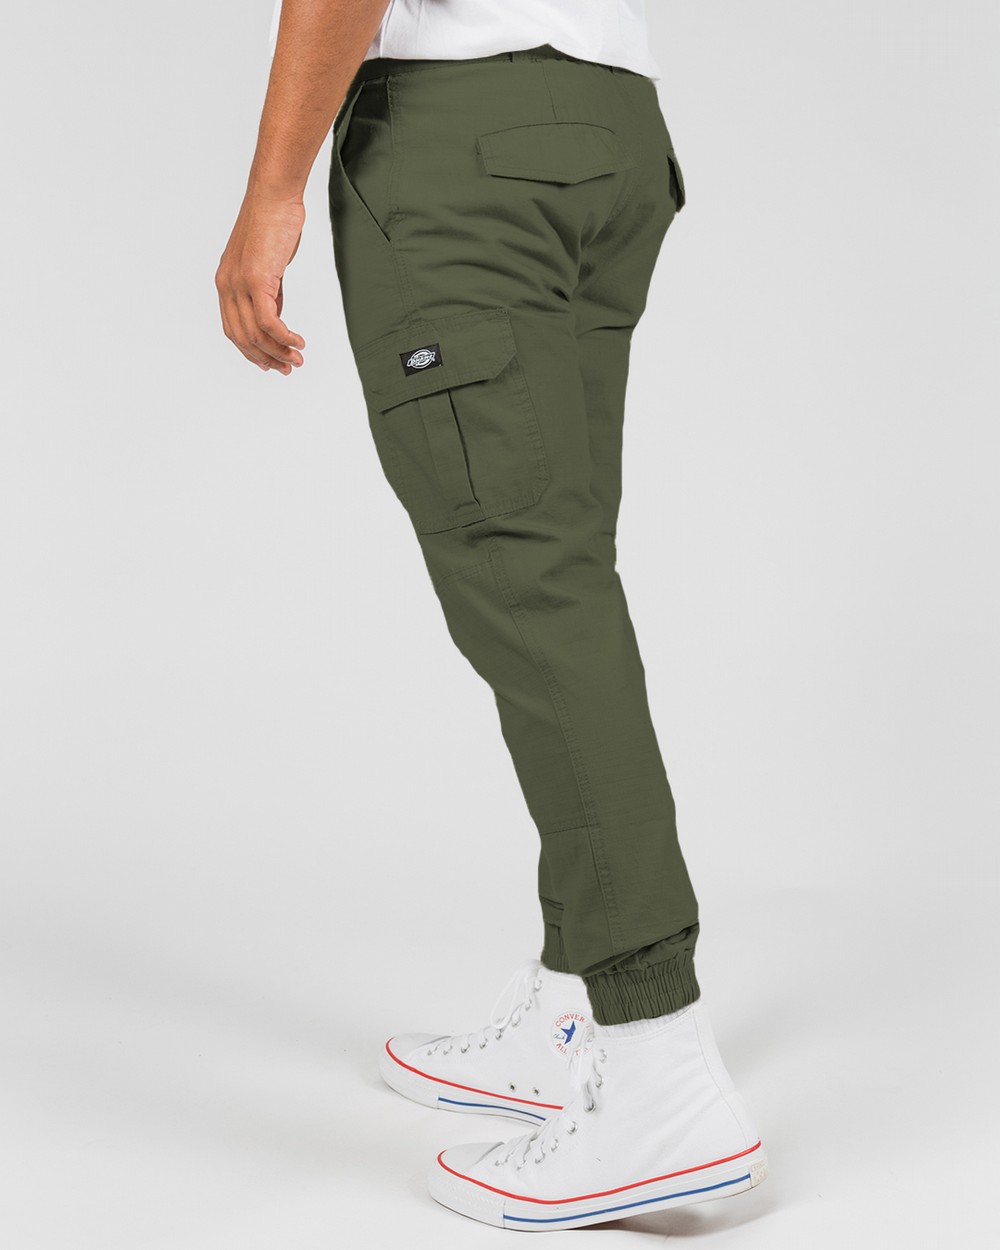 2-pack Slim Fit Cargo trousers with 20% discount! | Jack & Jones®